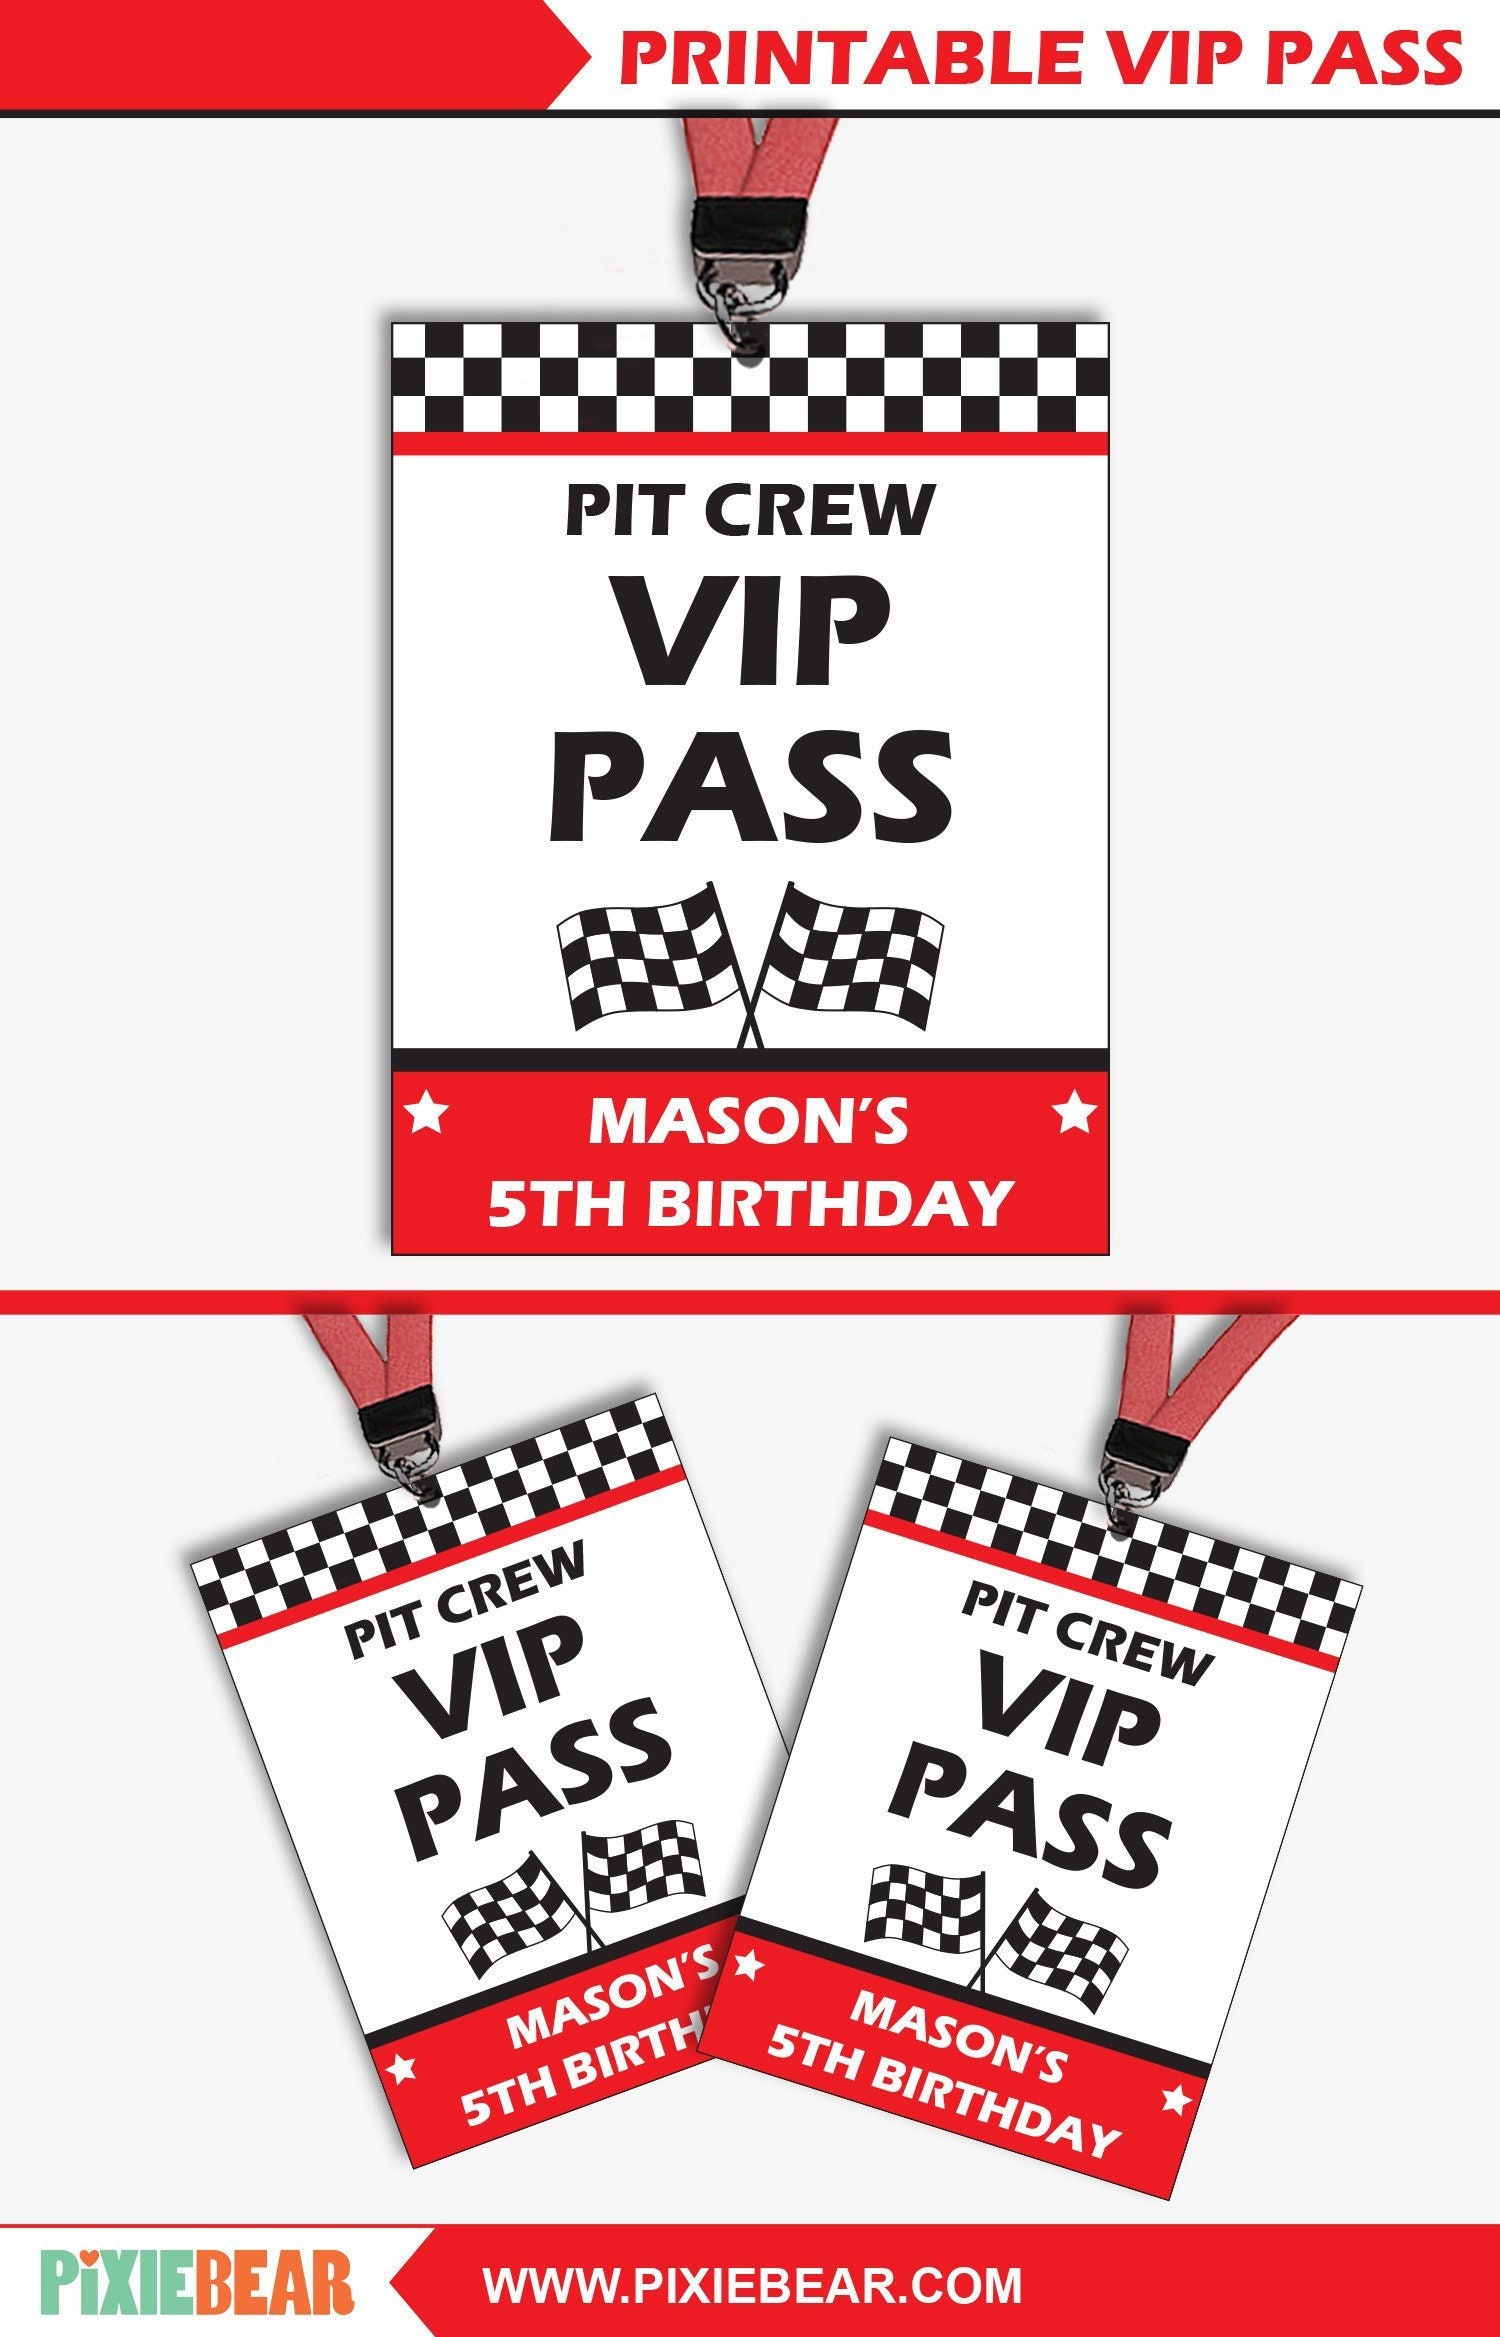 24 Pieces VIP Video Game Pass Holder with Lanyard Video Game Party Favors  VIP Party Pass Card Game on Tickets for Game Themed Birthday Party Supplies